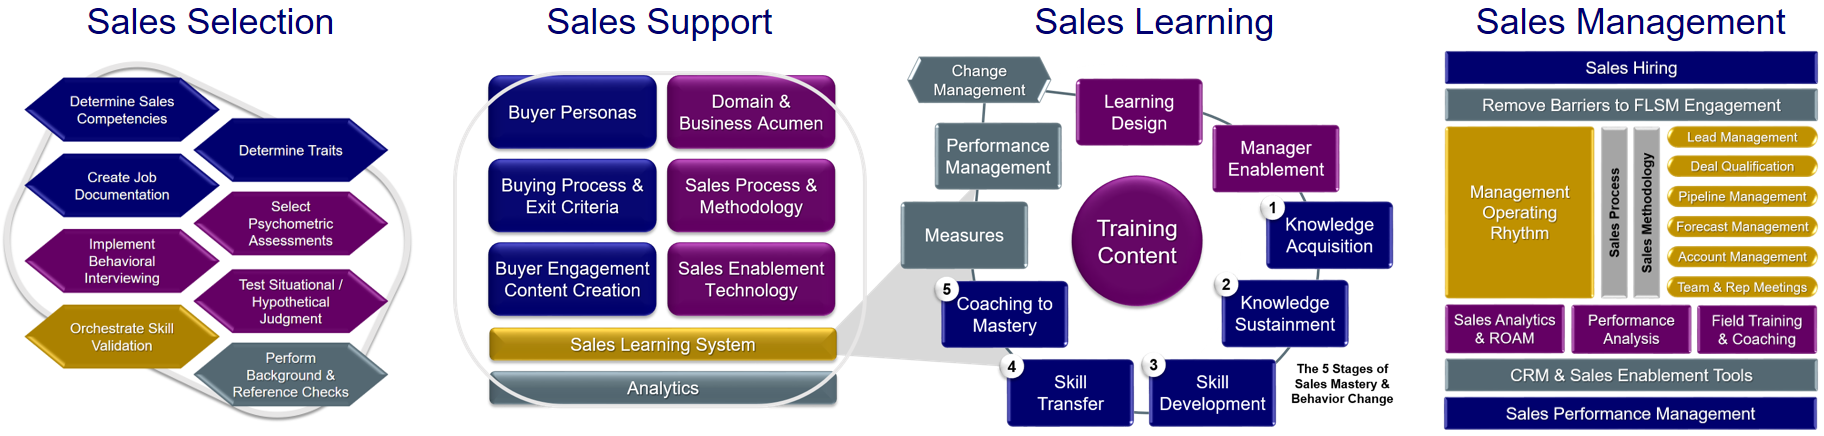 The Four Sales Systems 2018